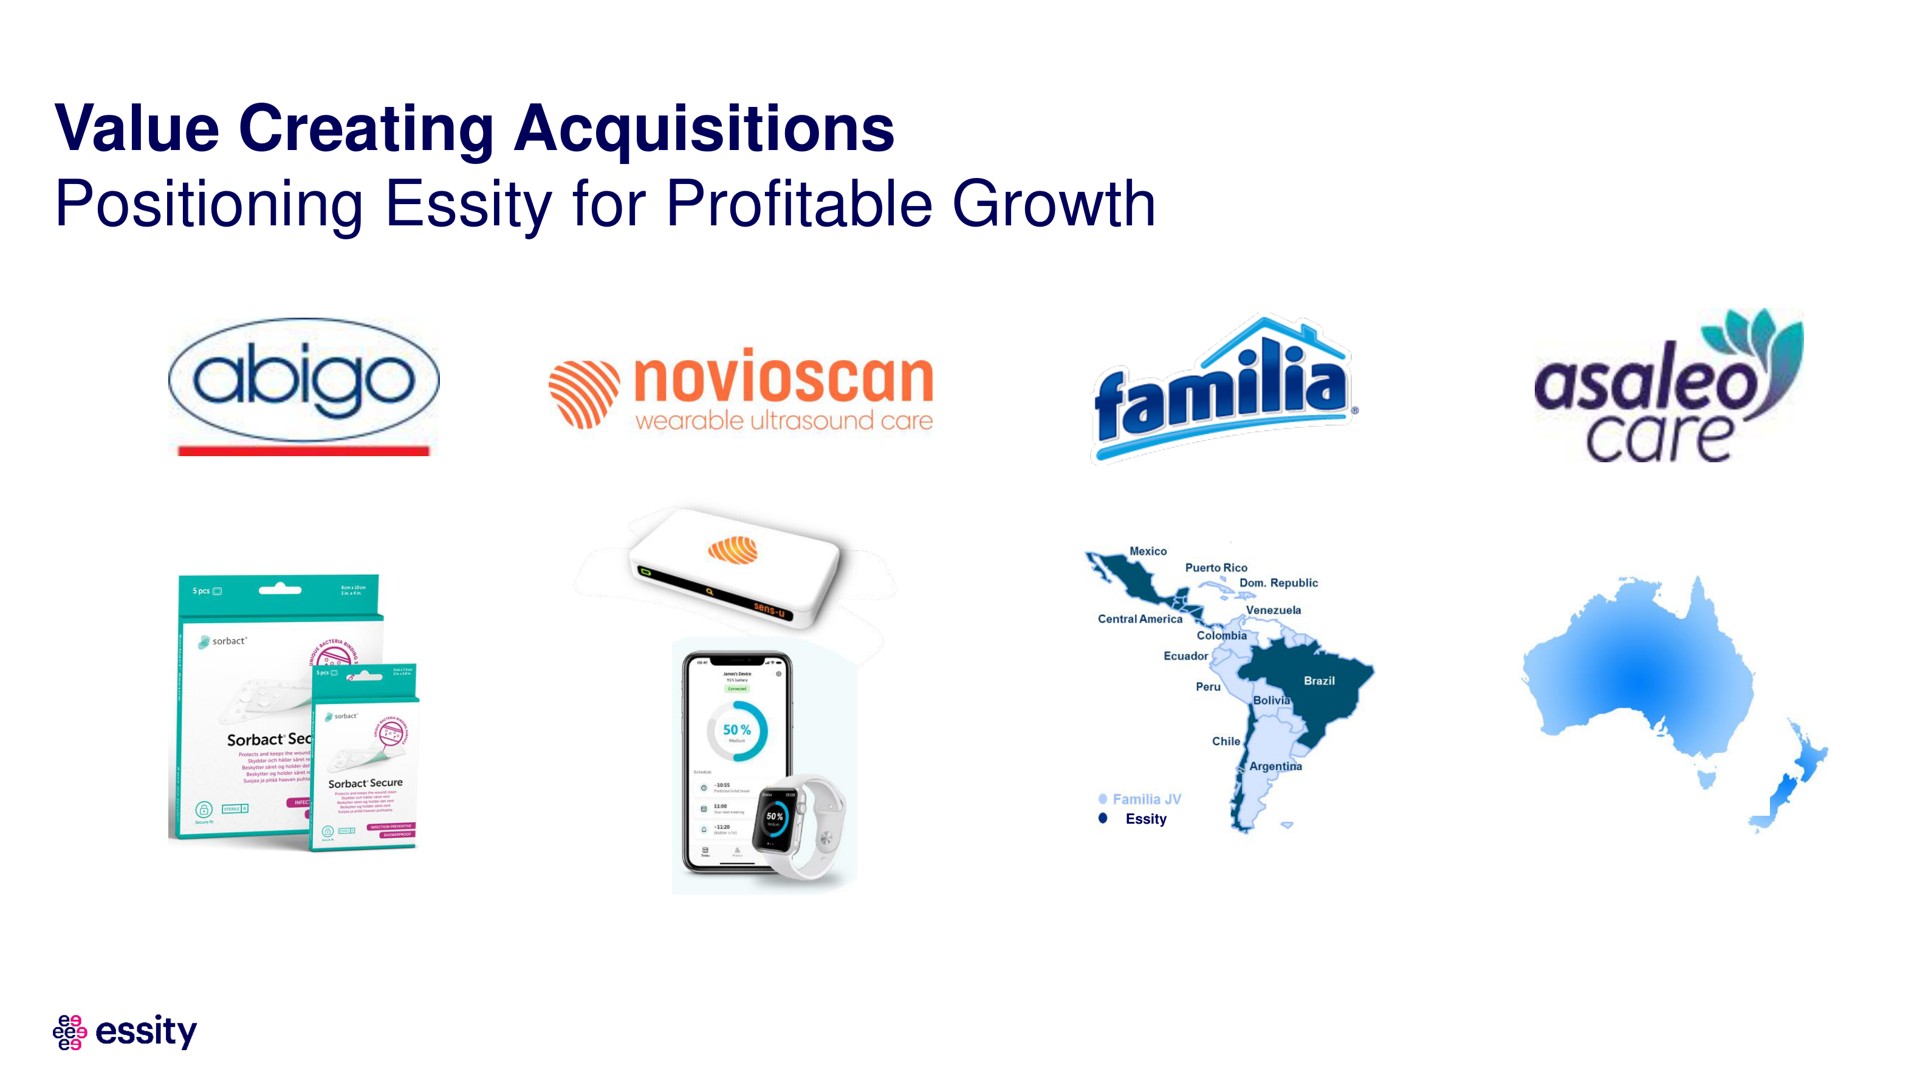 value creating acquisitions positioning for profitable growth ilia | Essity